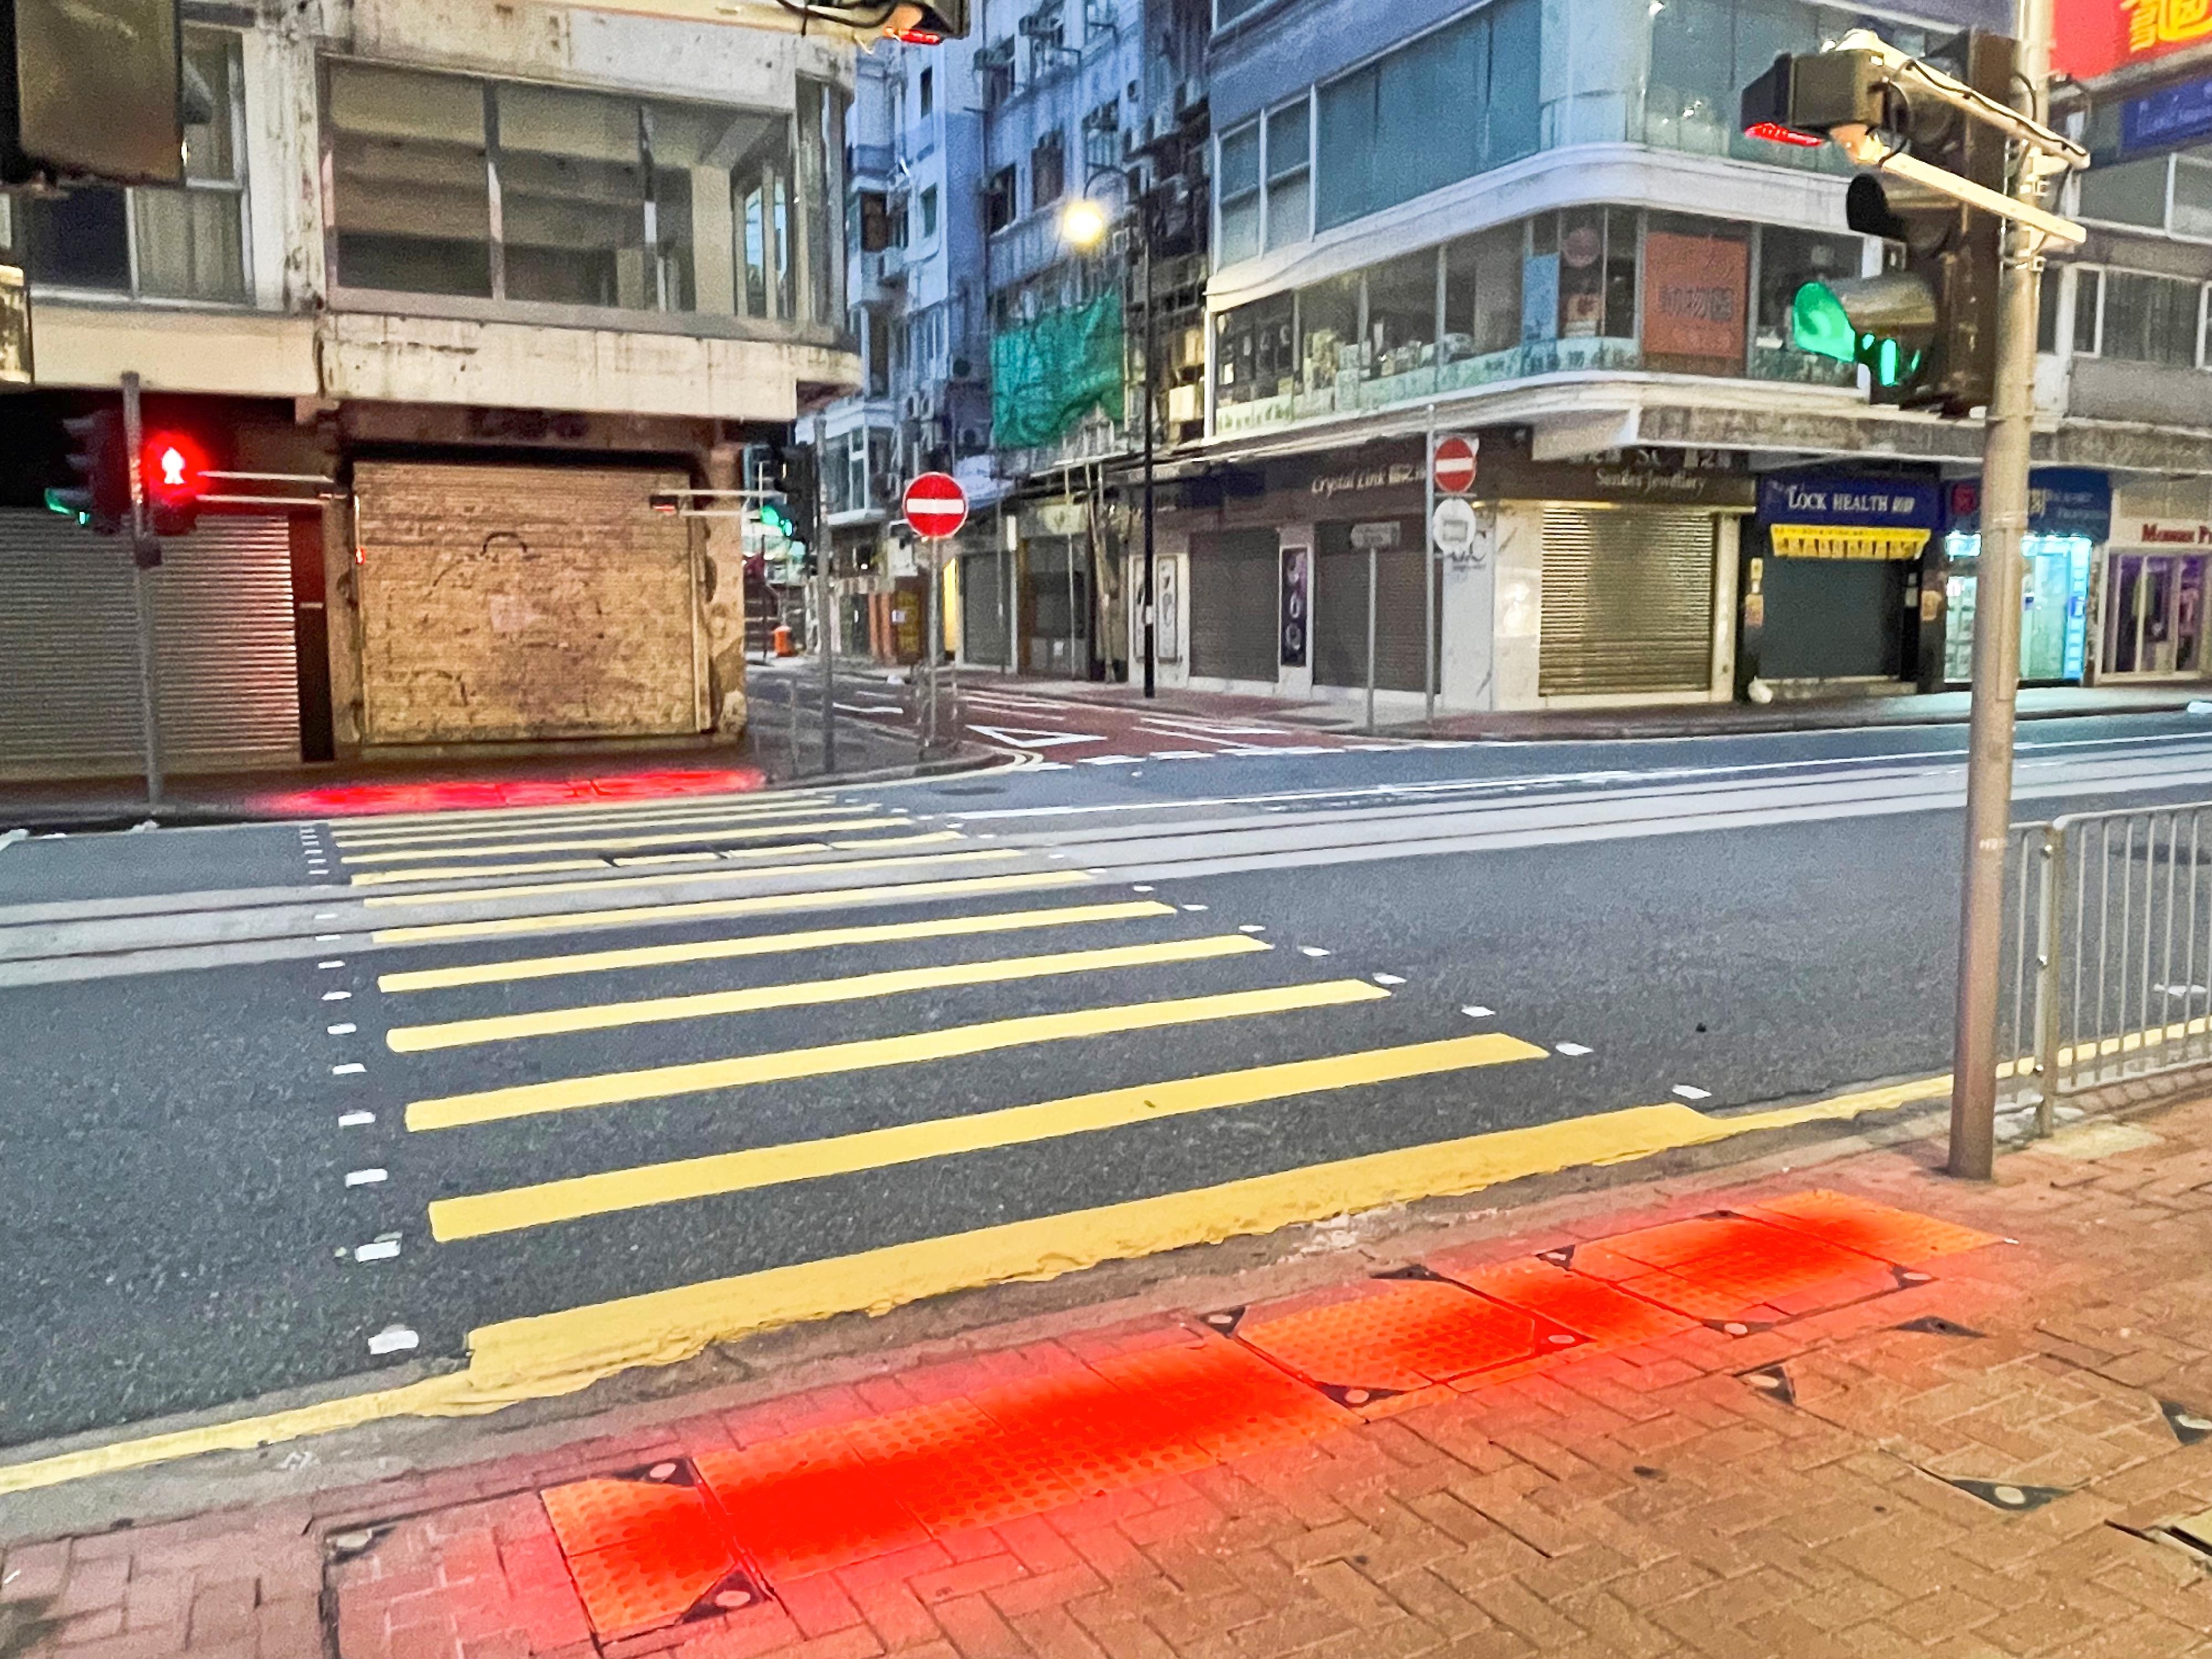 The Transport Department said today (July 5) that it has installed an auxiliary device at the road crossing of Percival Street/Foo Ming Street to remind pedestrians not to cross the road when the "red man" symbol is lit, so as to enhance their awareness of road safety.